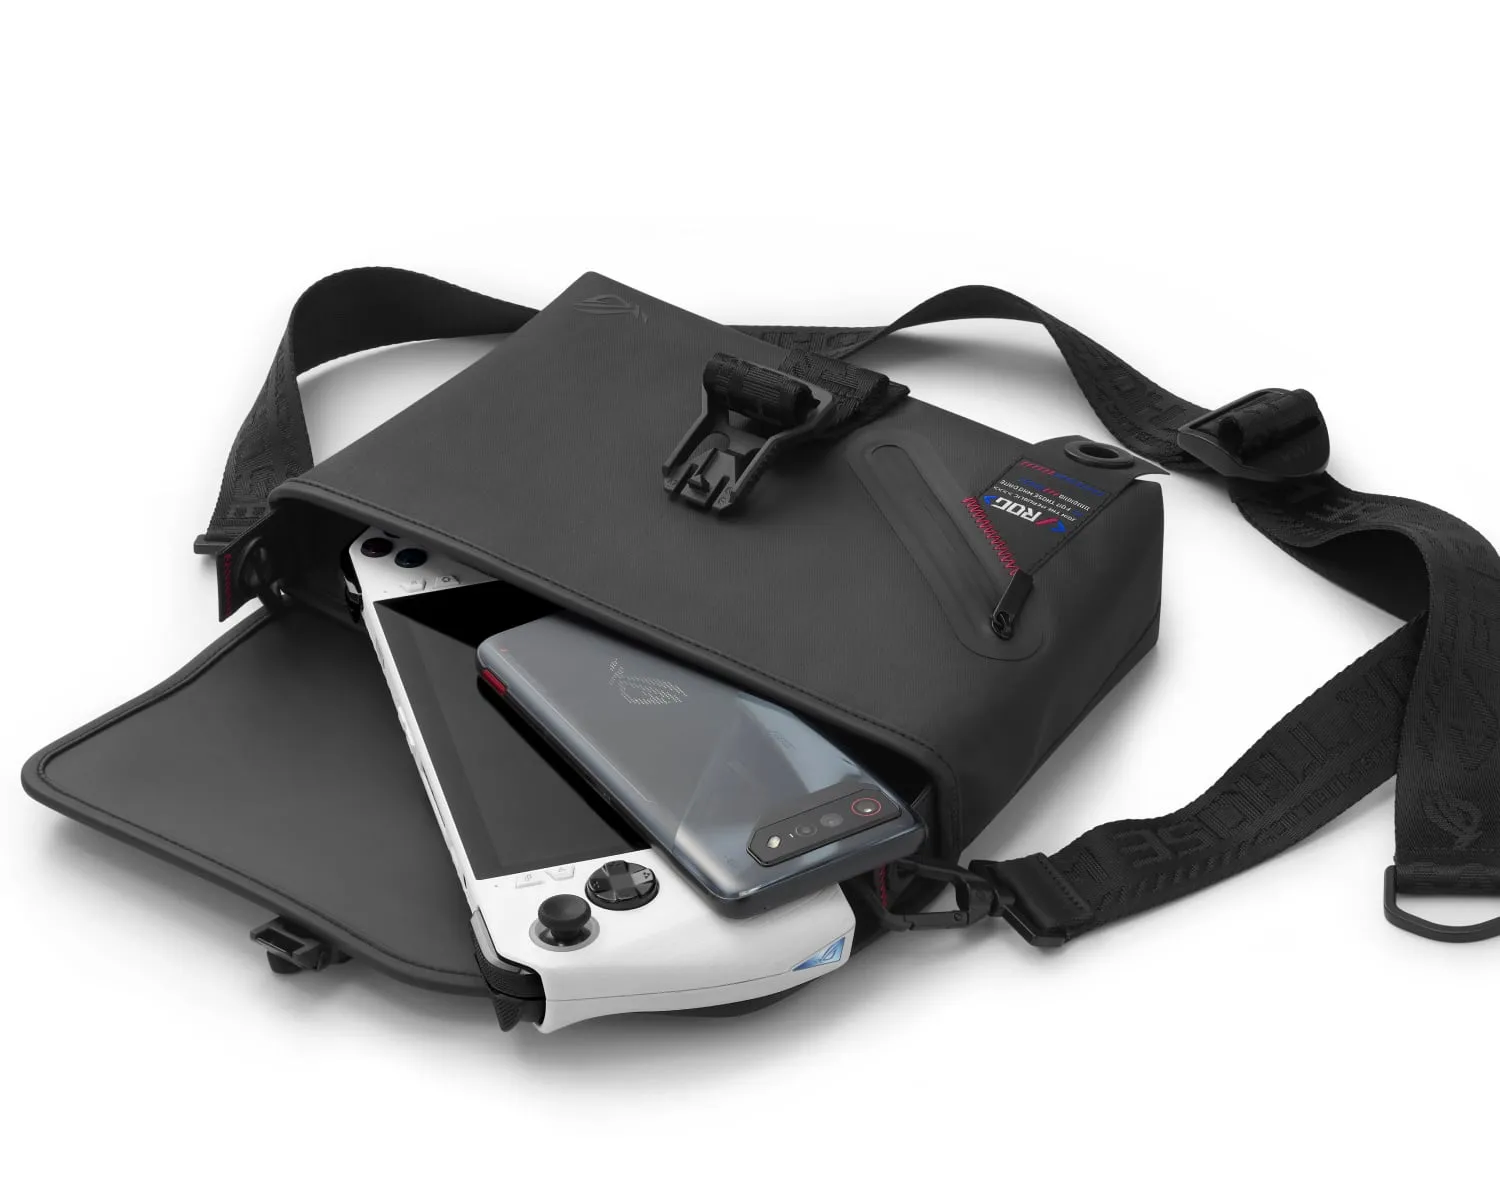 The ROG SLASH Sling Bag 2.0, with the main compartment open and an ROG Ally and ROG Phone visible inside